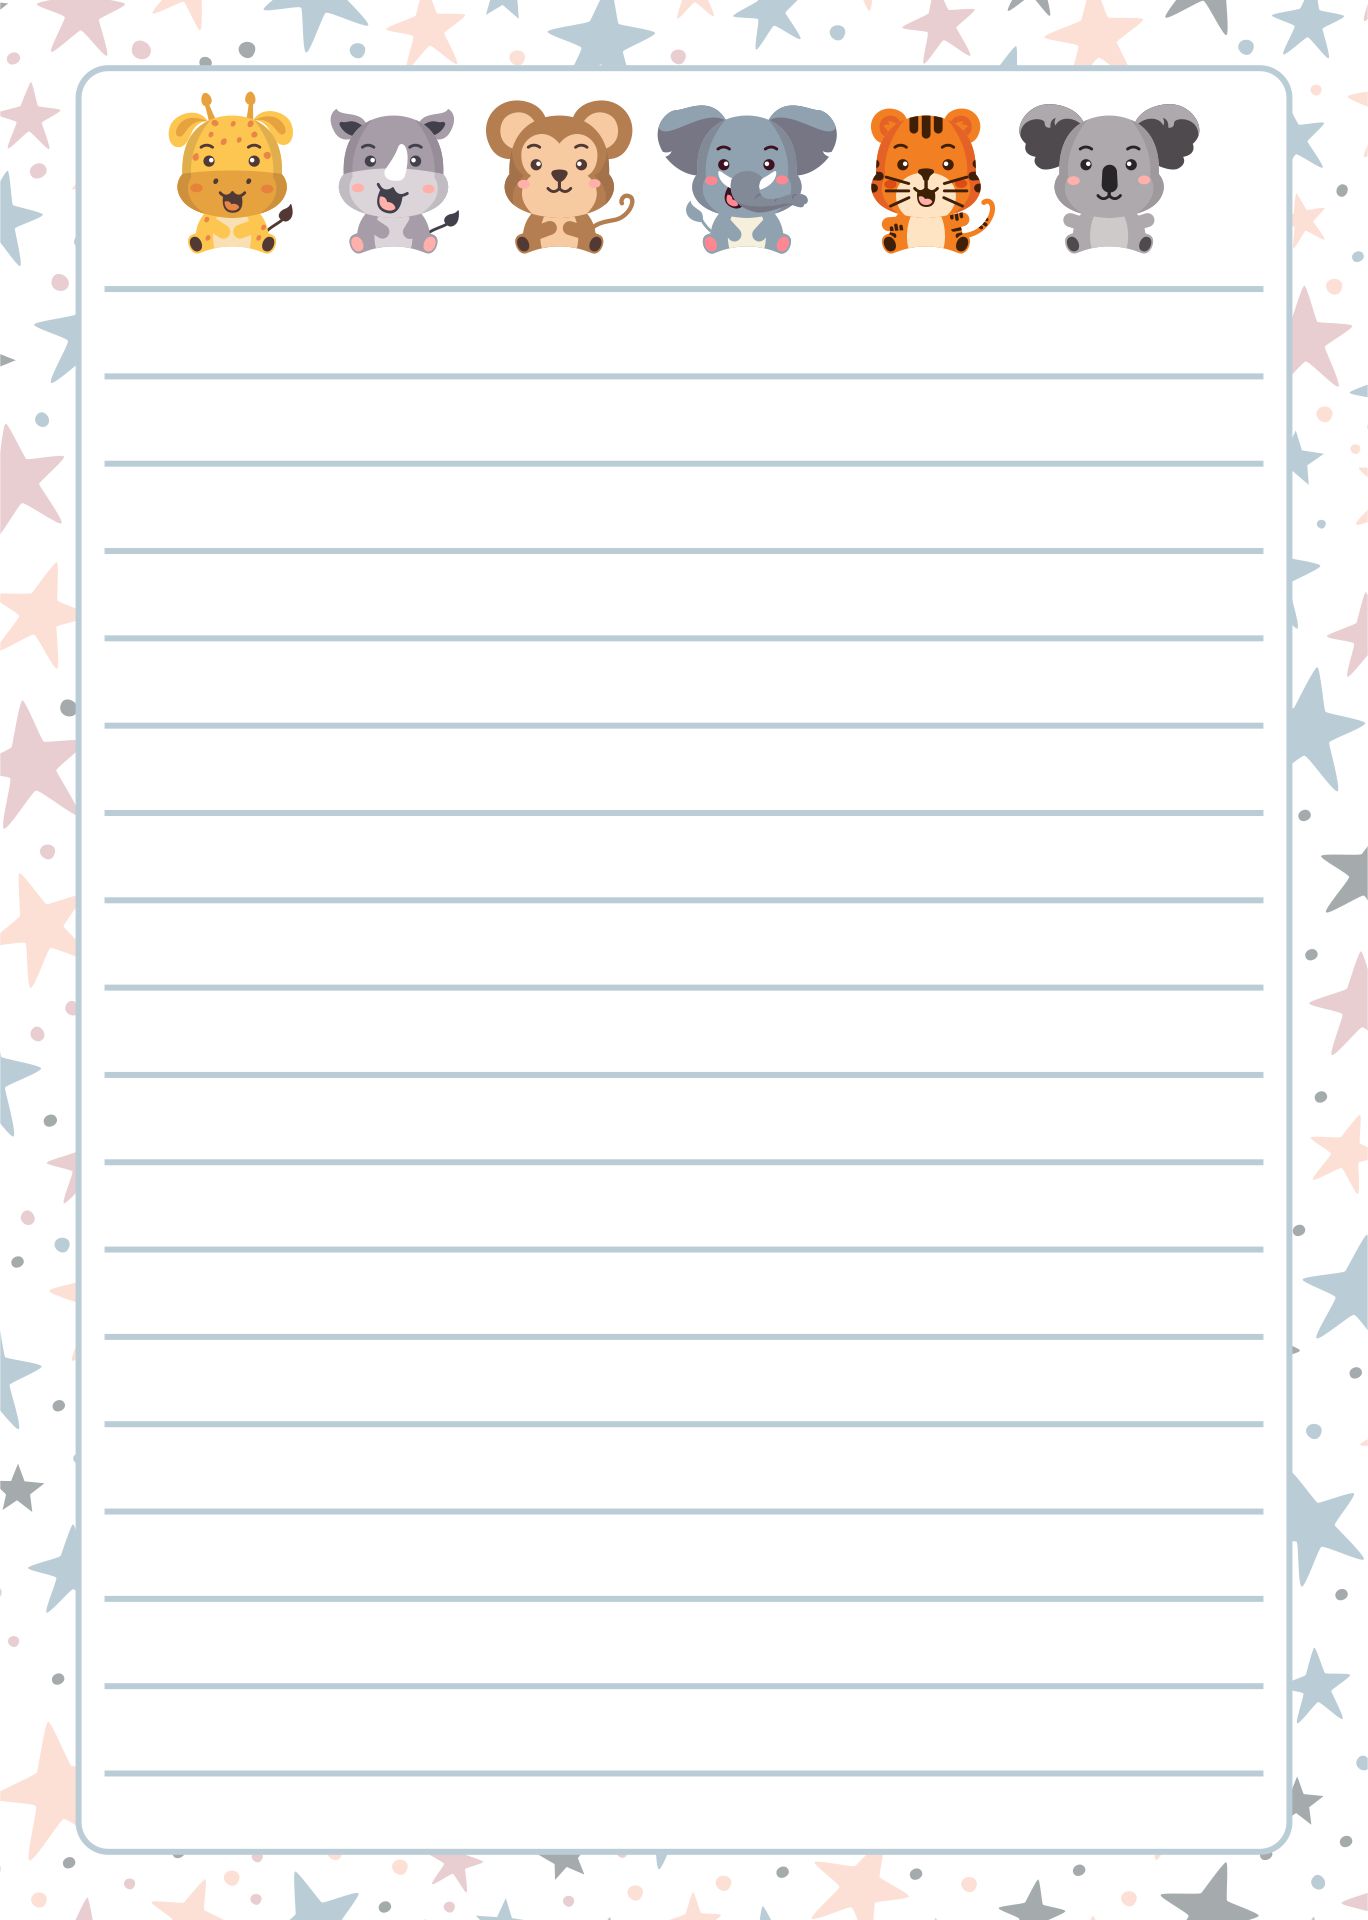 Lined Letter Writing Paper Template - Infoupdate.org